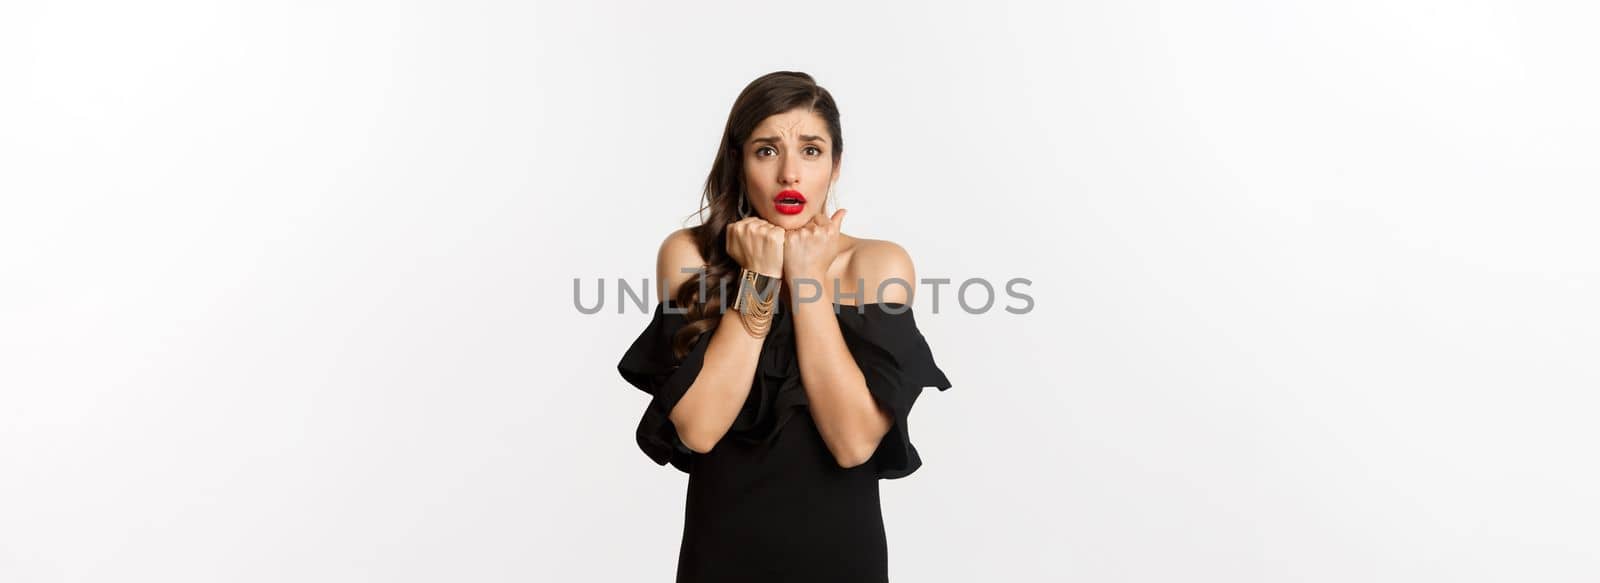 Fashion and beauty concept. Scared timid woman grimacing, looking concerned and worried at camera, standing over white background in black dress.